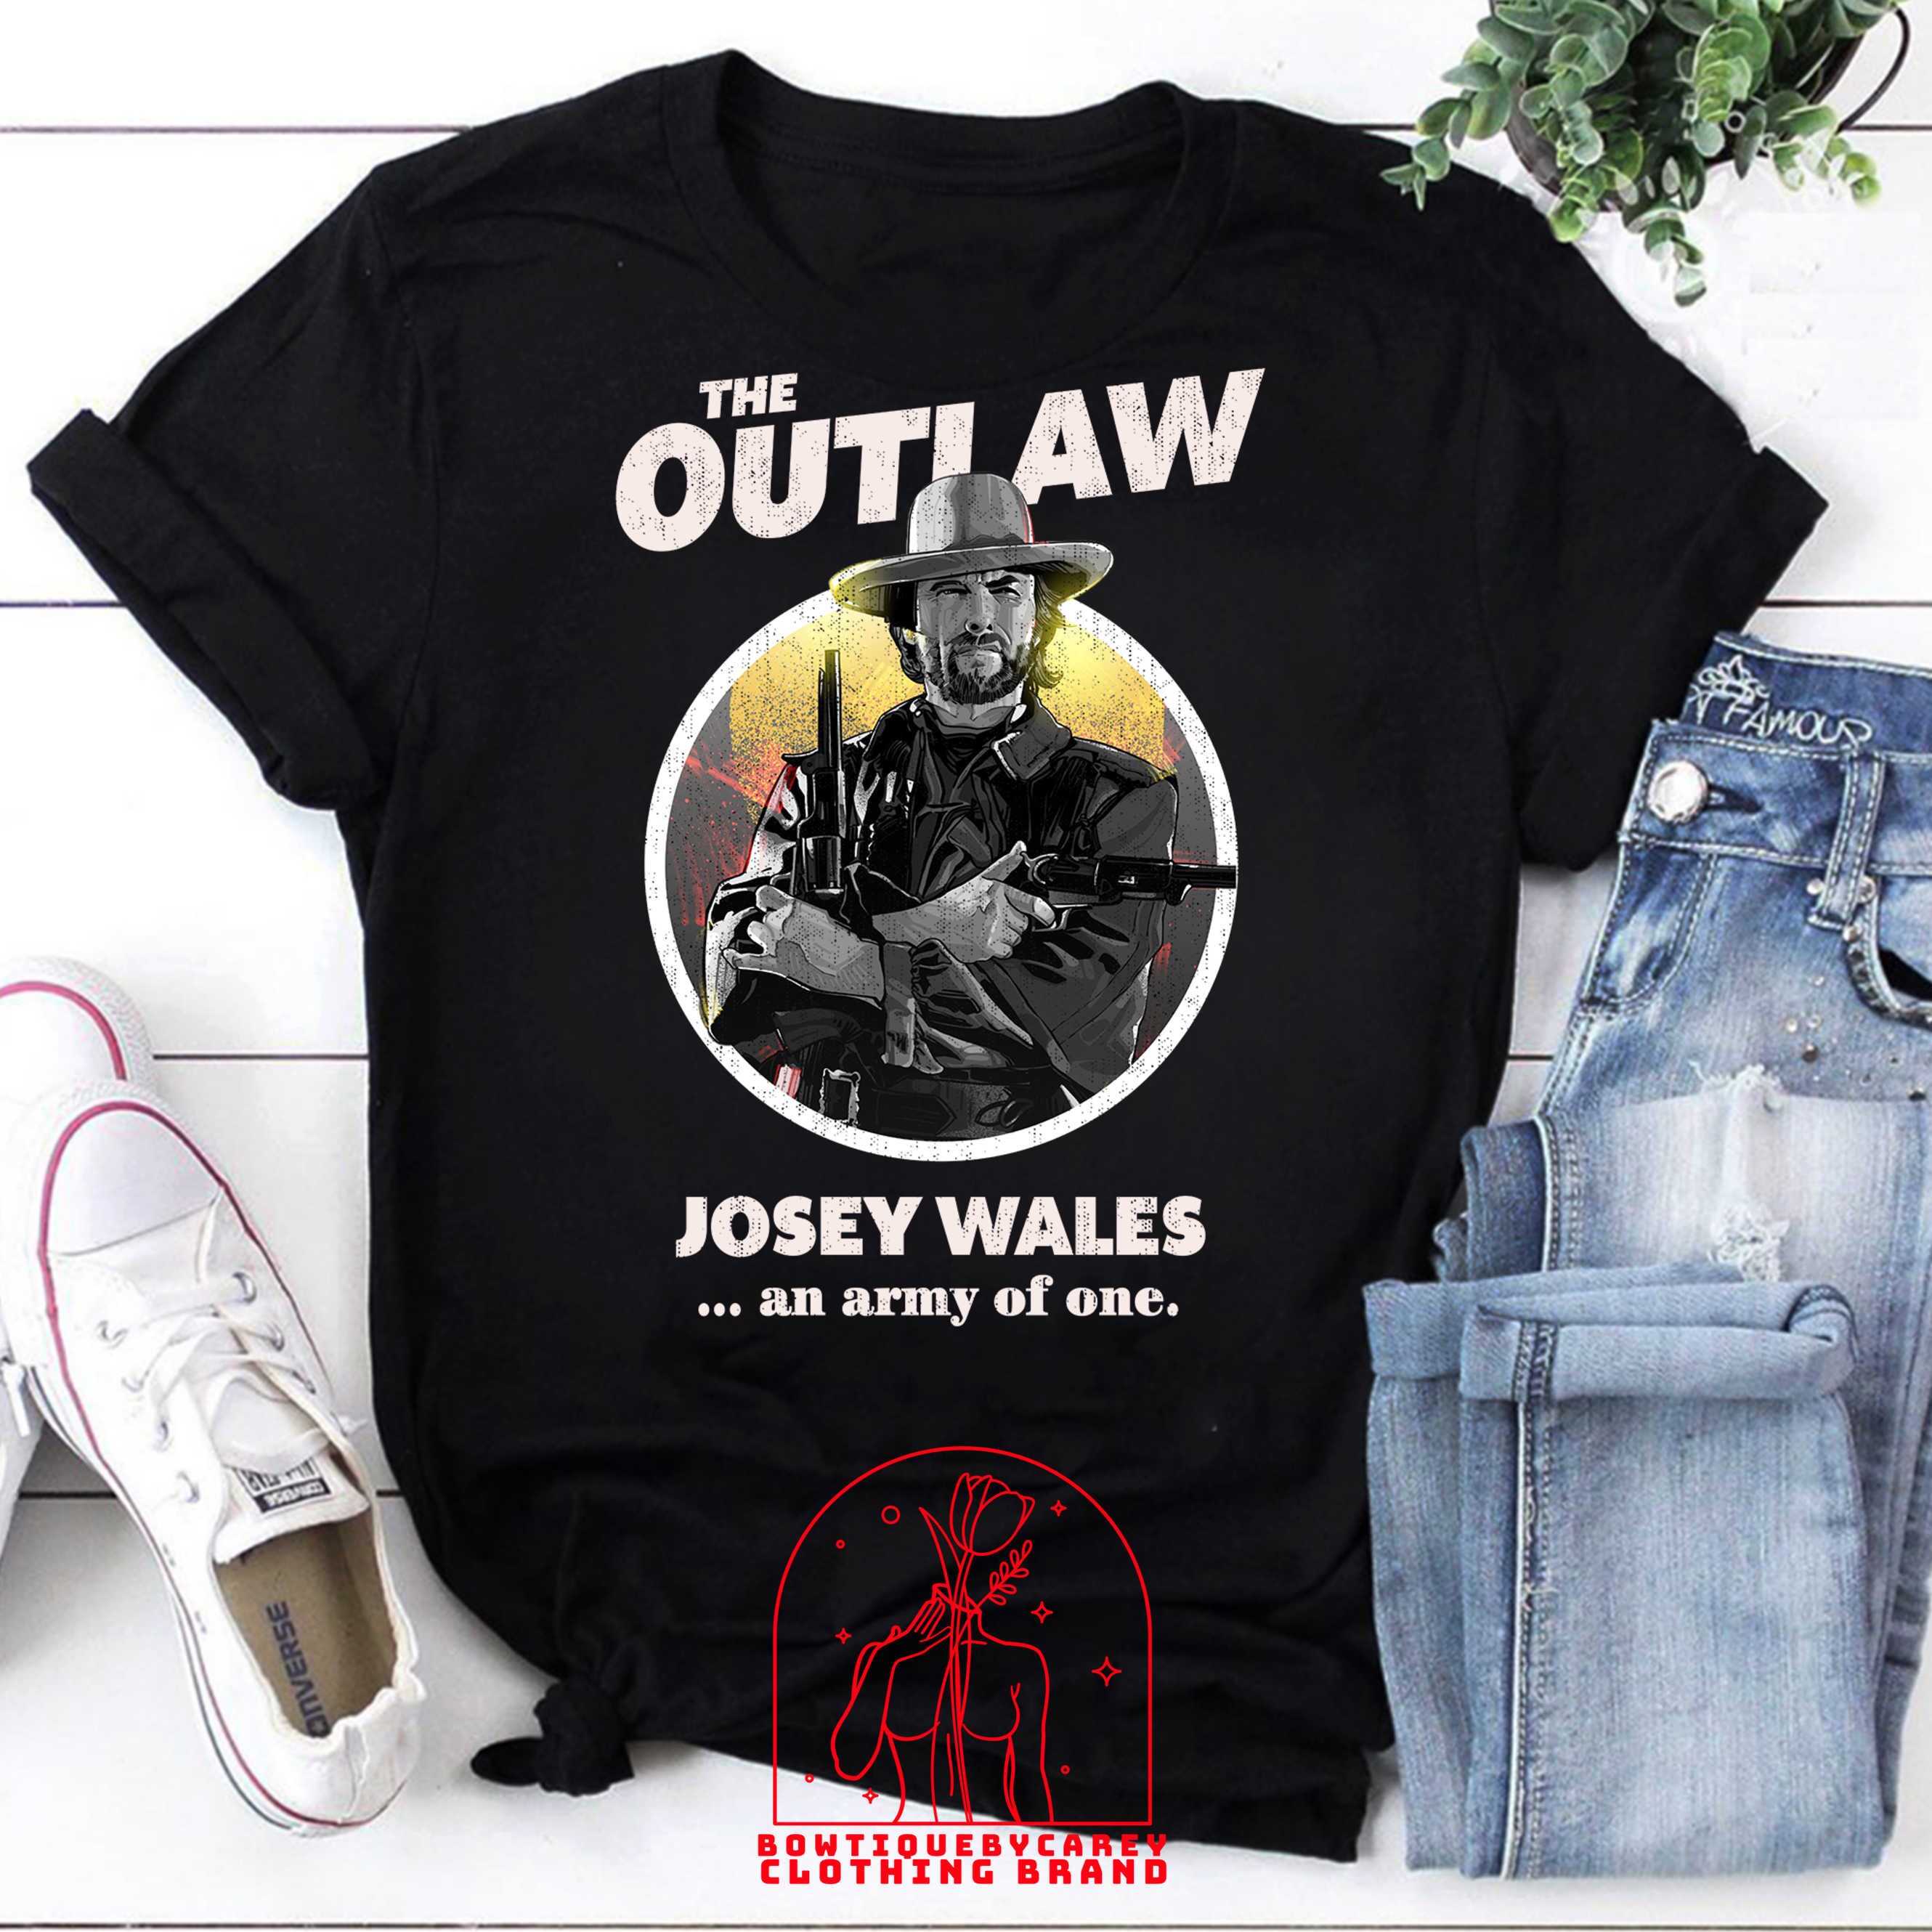 Discover The Outlaw Josey Wales Vintage T-Shirt, The Outlaw Shirt